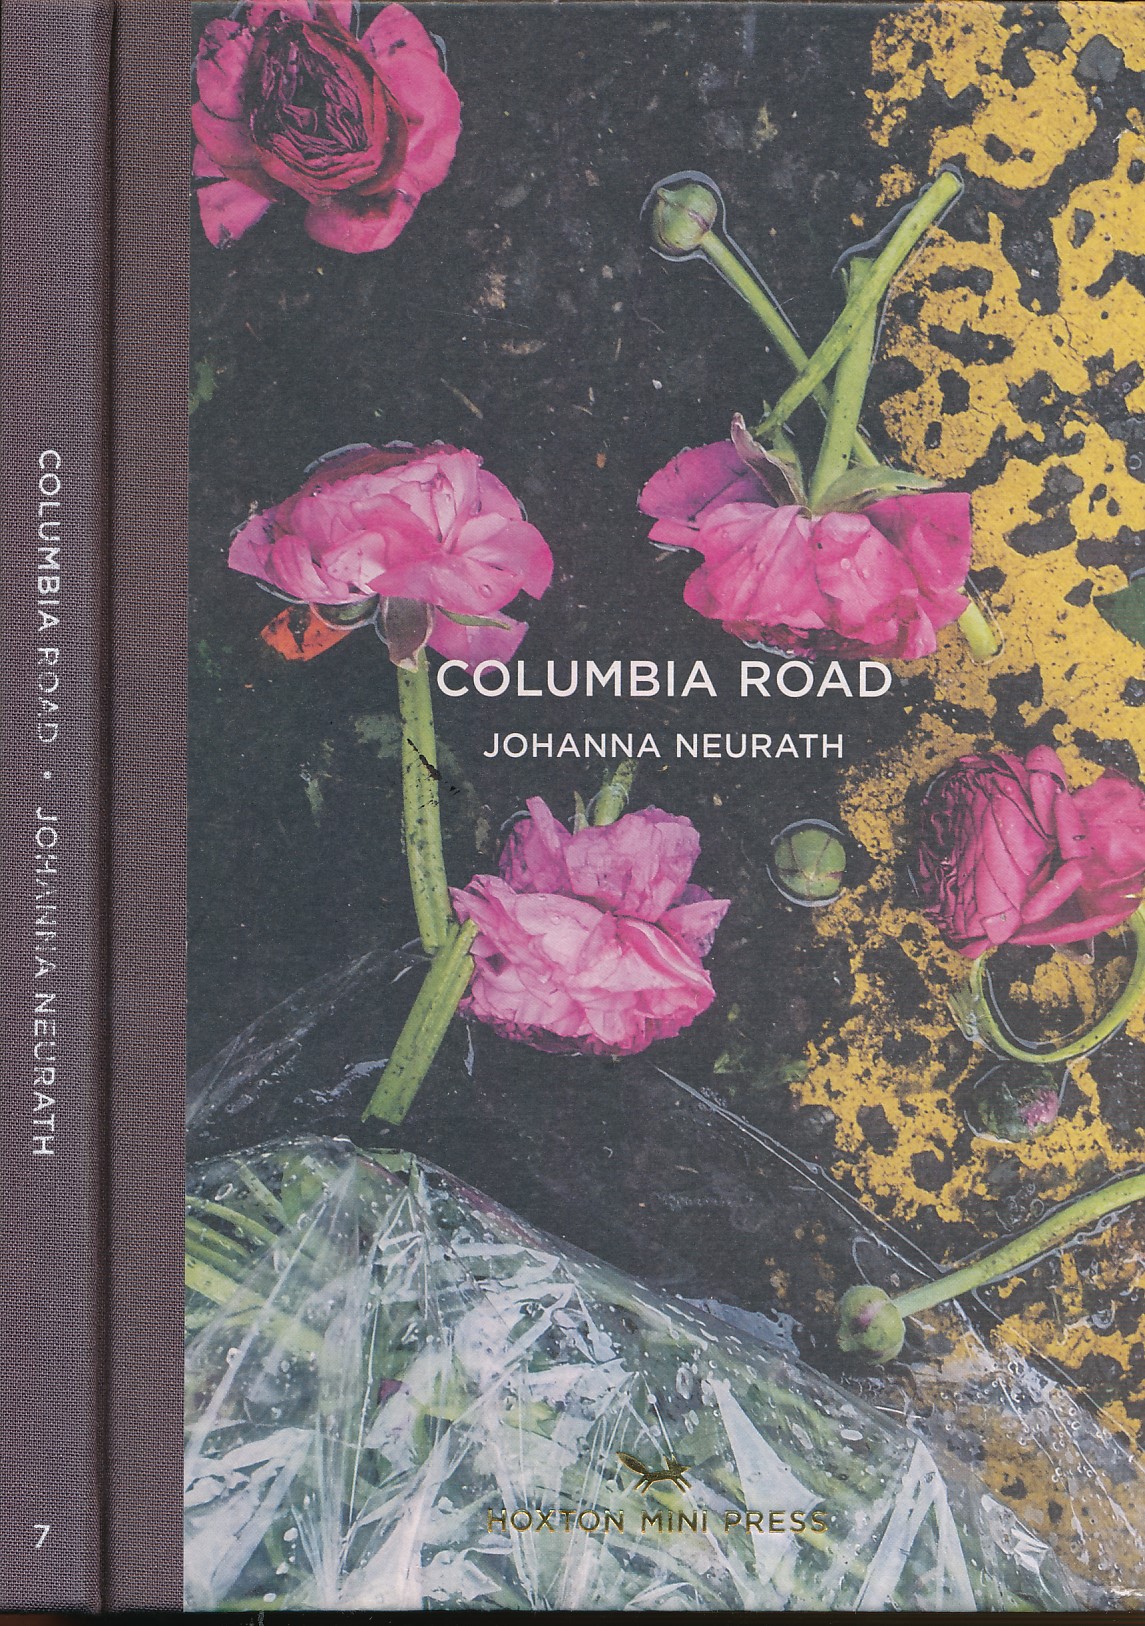 Columbia Road. East London Photo Stories Book Seven